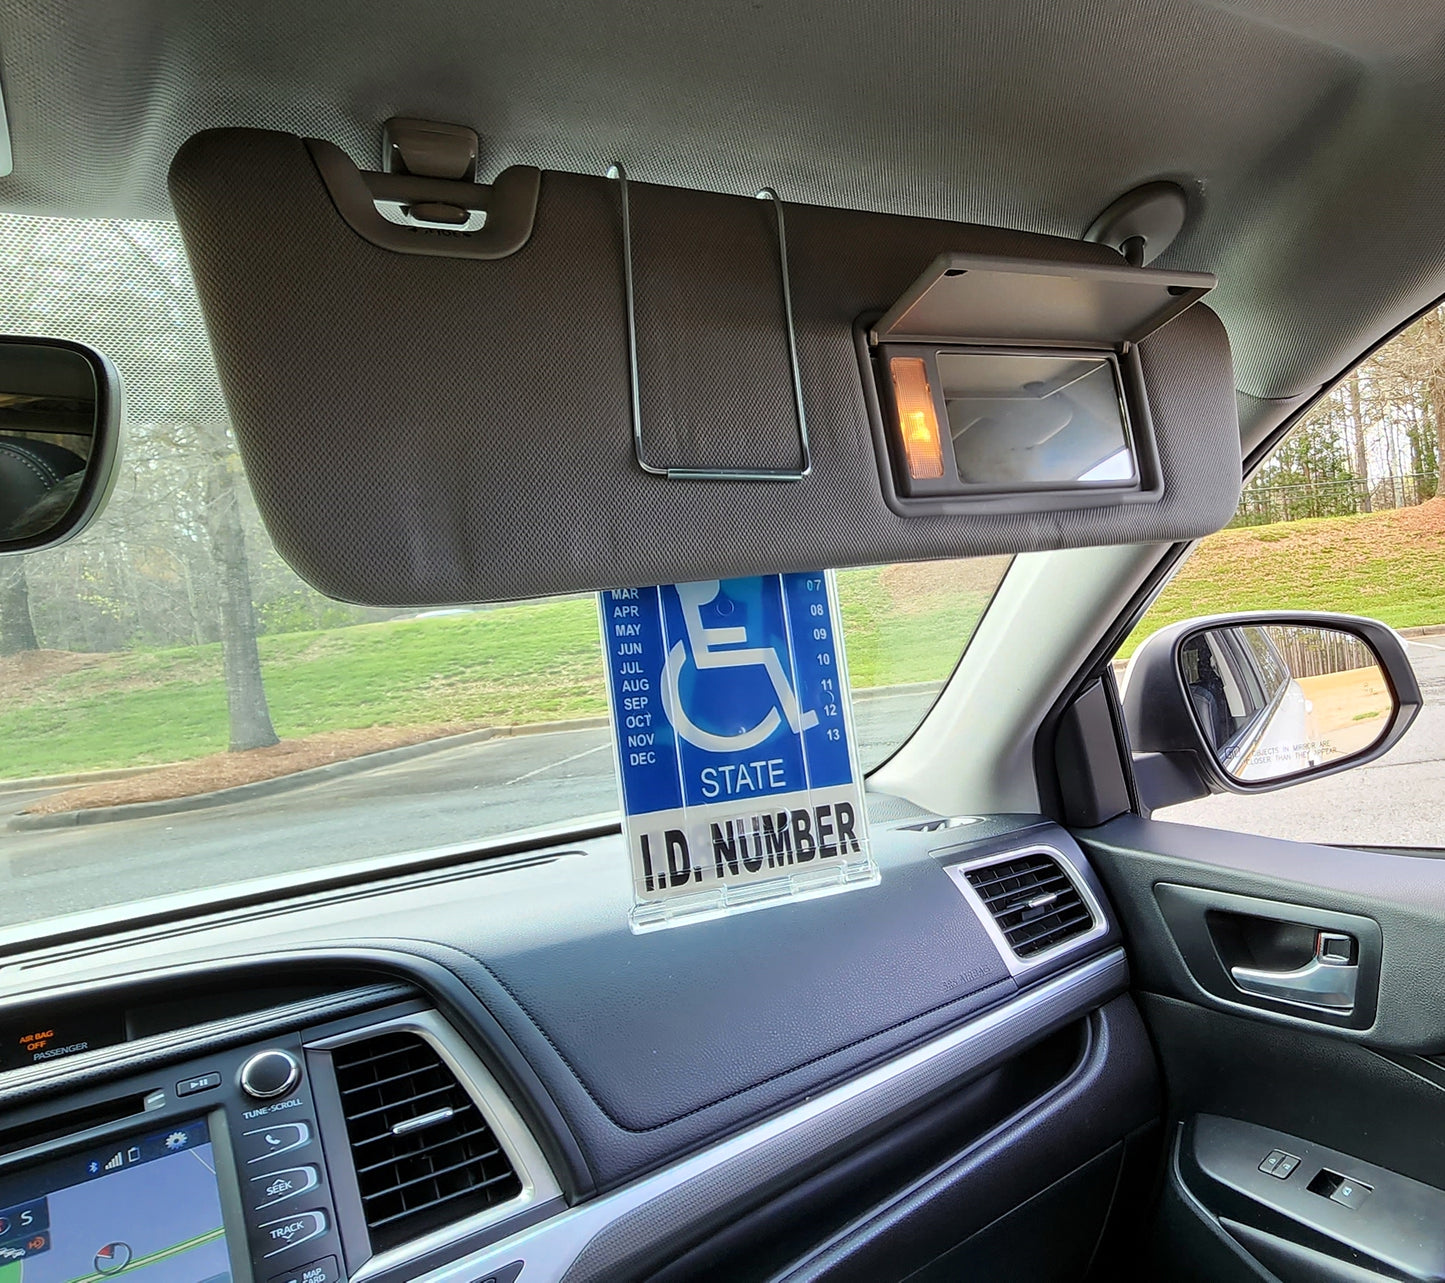 Visor mounted handical parking placard holder.  Clips to visor, and magnetically held in off position